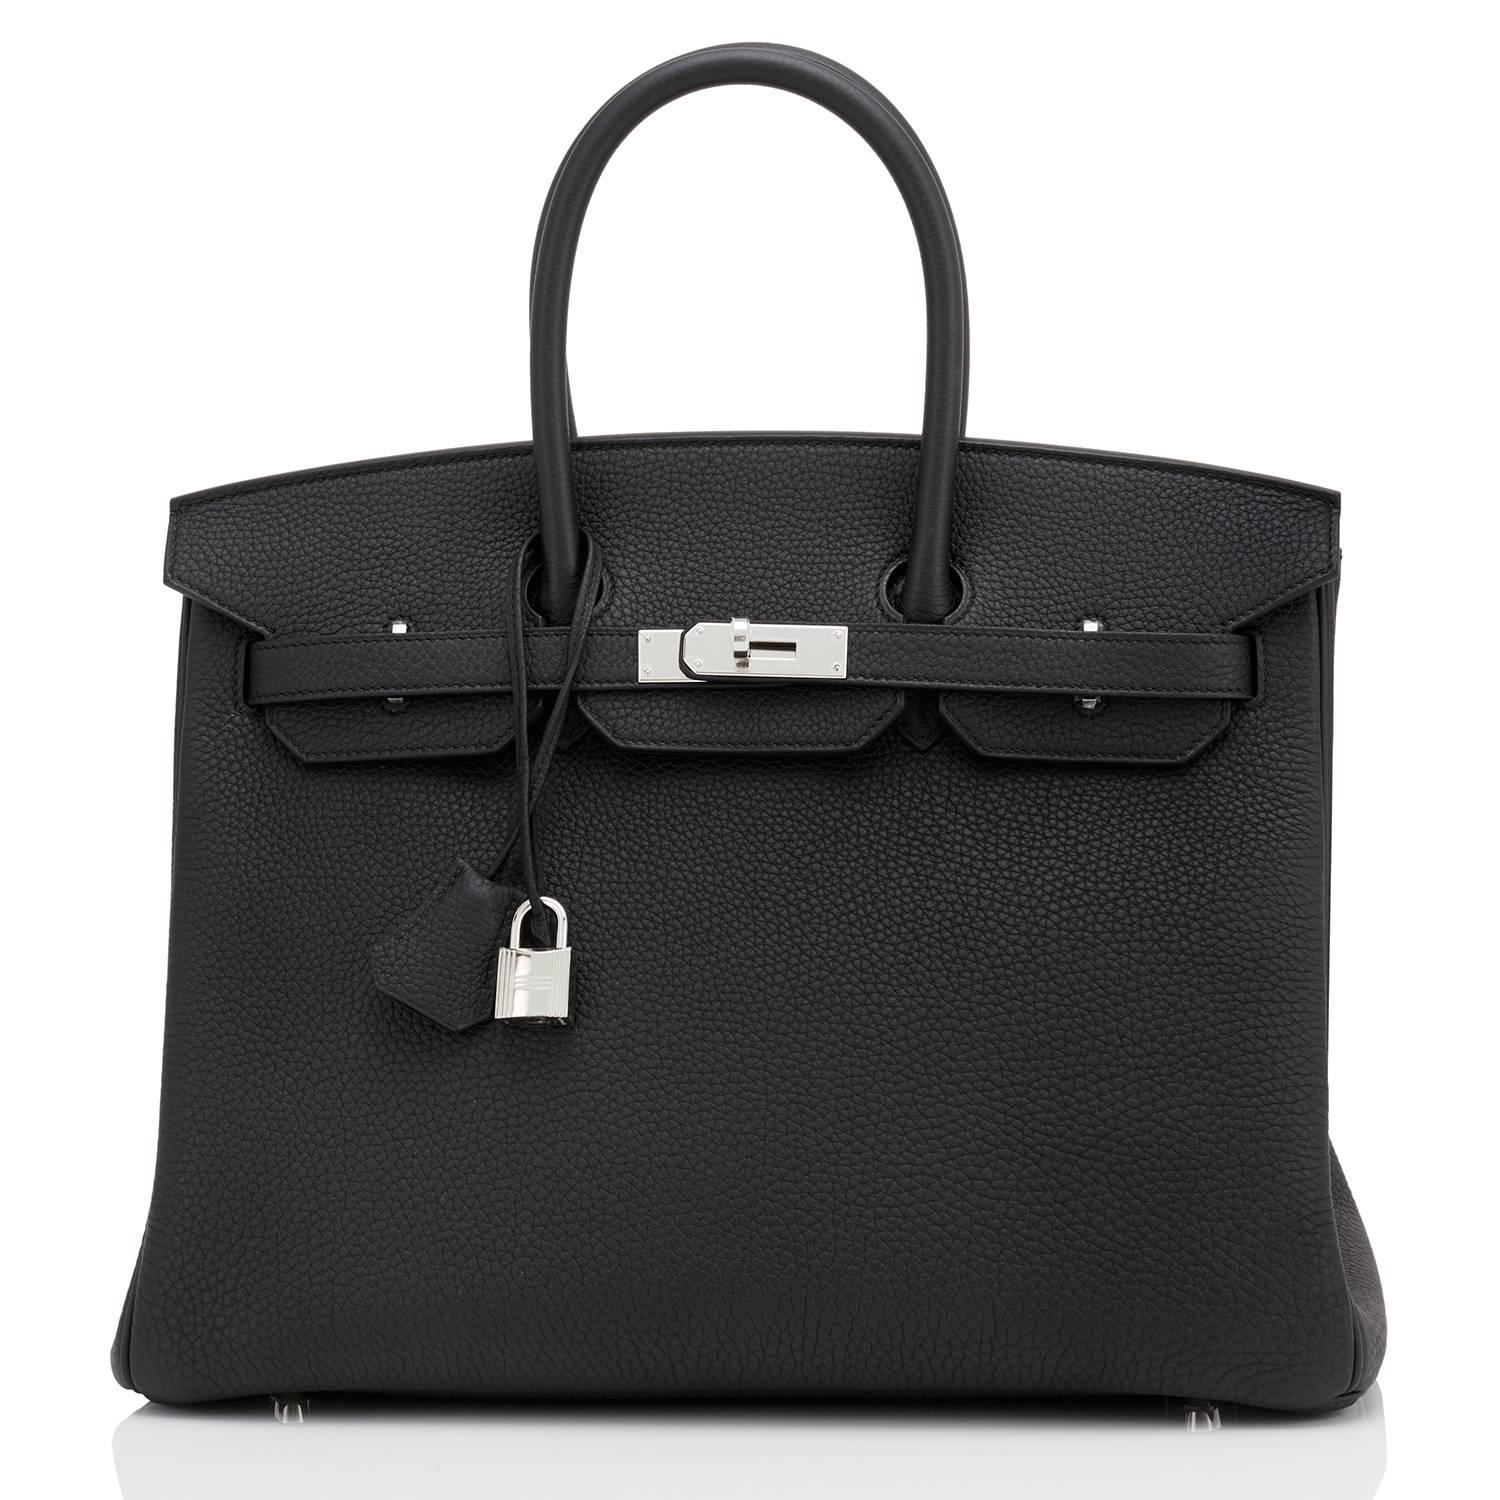 BANK WIRE PRICE ONLY
Hermes Black Togo 35cm Birkin Palladium Hardware Bag Superbly Chic 
New or Never Worn. Pristine Condition (with plastic on hardware)
Perfect gift! Comes with lock, keys, clochette, sleeper, raincoat, and orange Hermes box.
Make